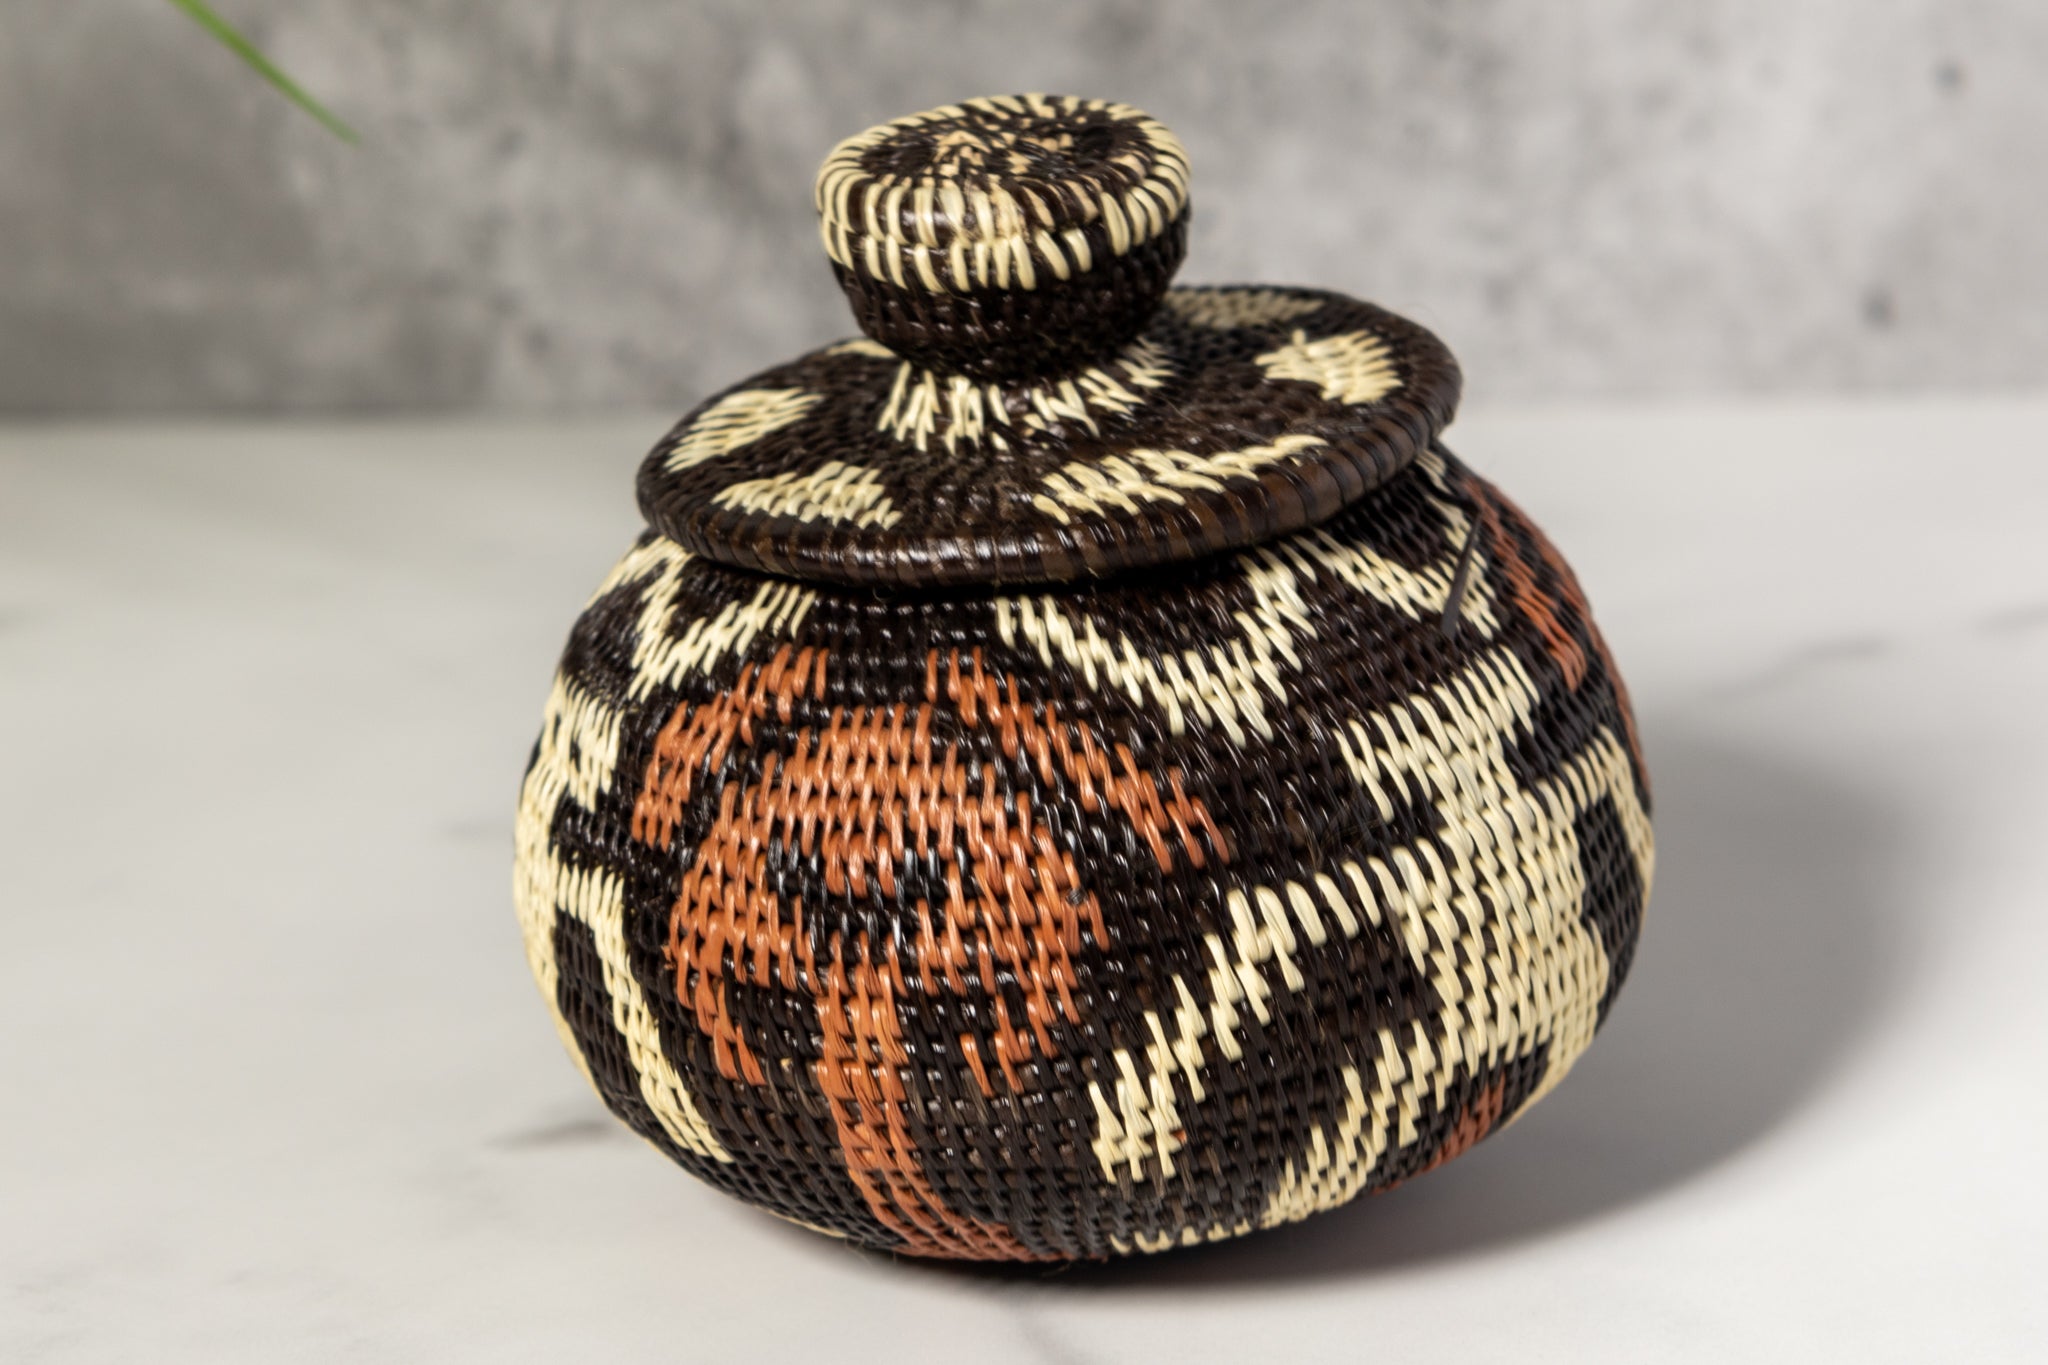 Human Cave Drawings Woven Basket With Top